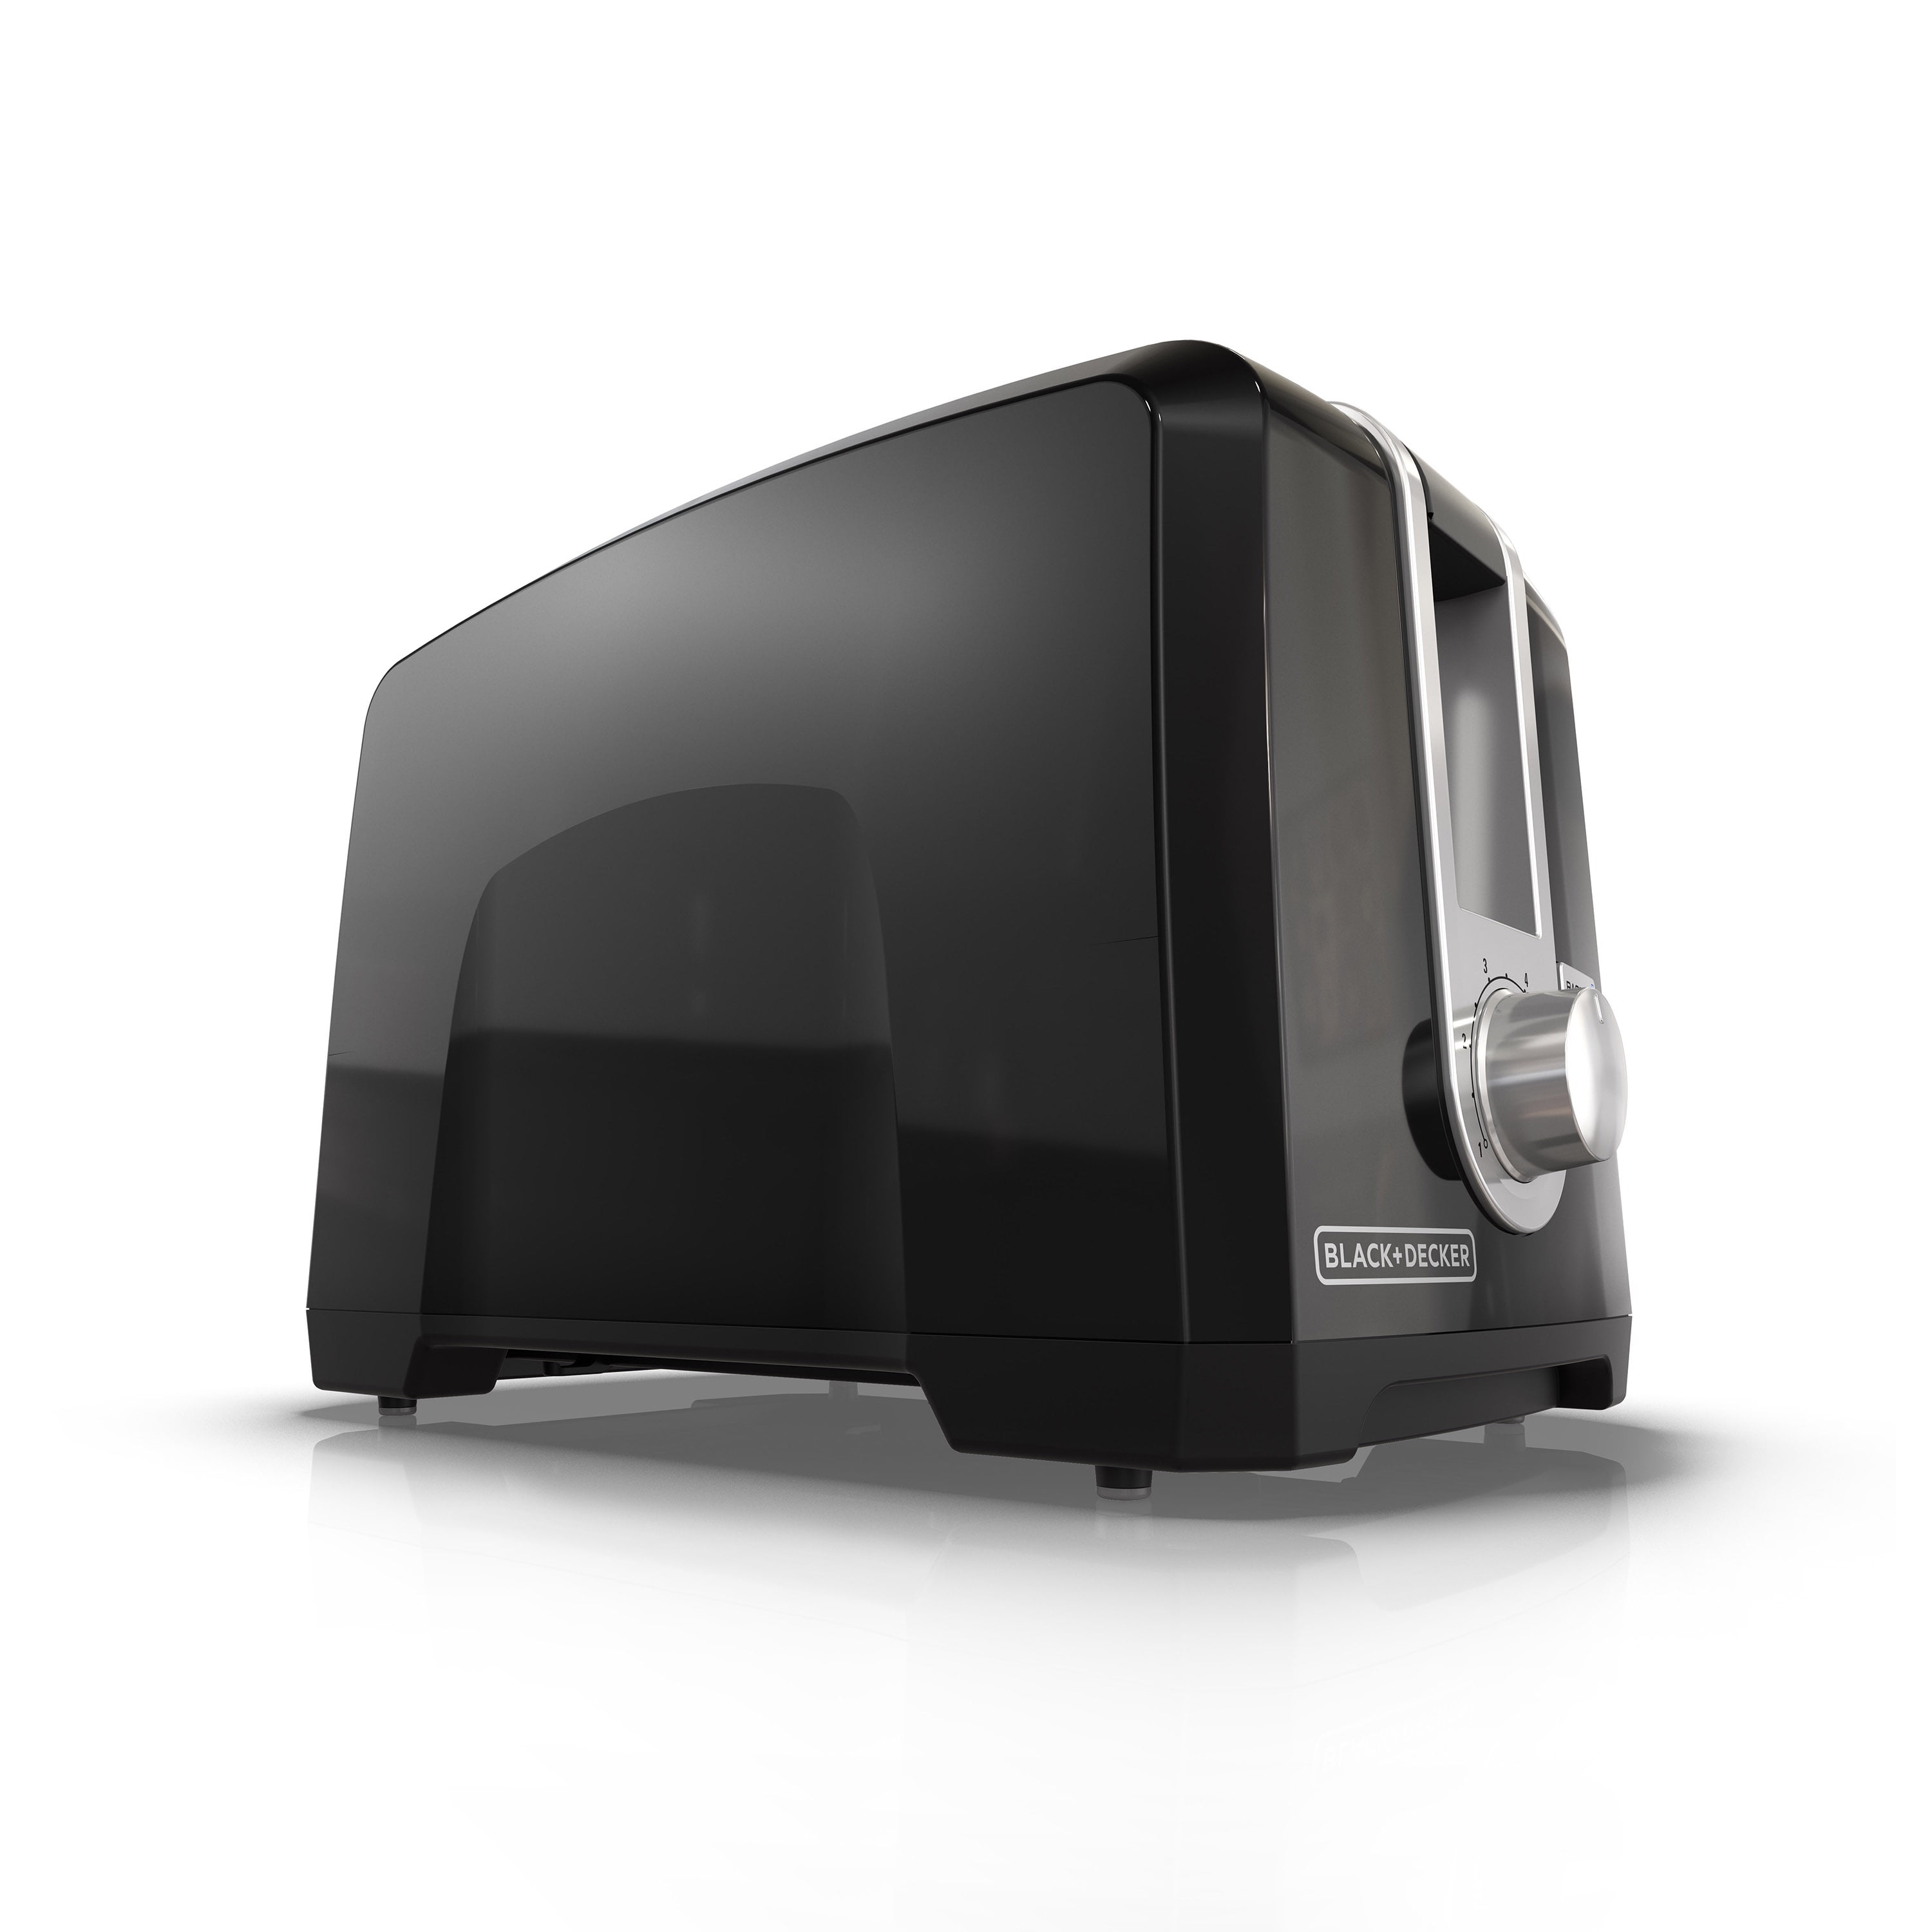 BLACK+DECKER 2-Slice Black Wide Slot Toaster with Temperature Control  TR1300BD - The Home Depot